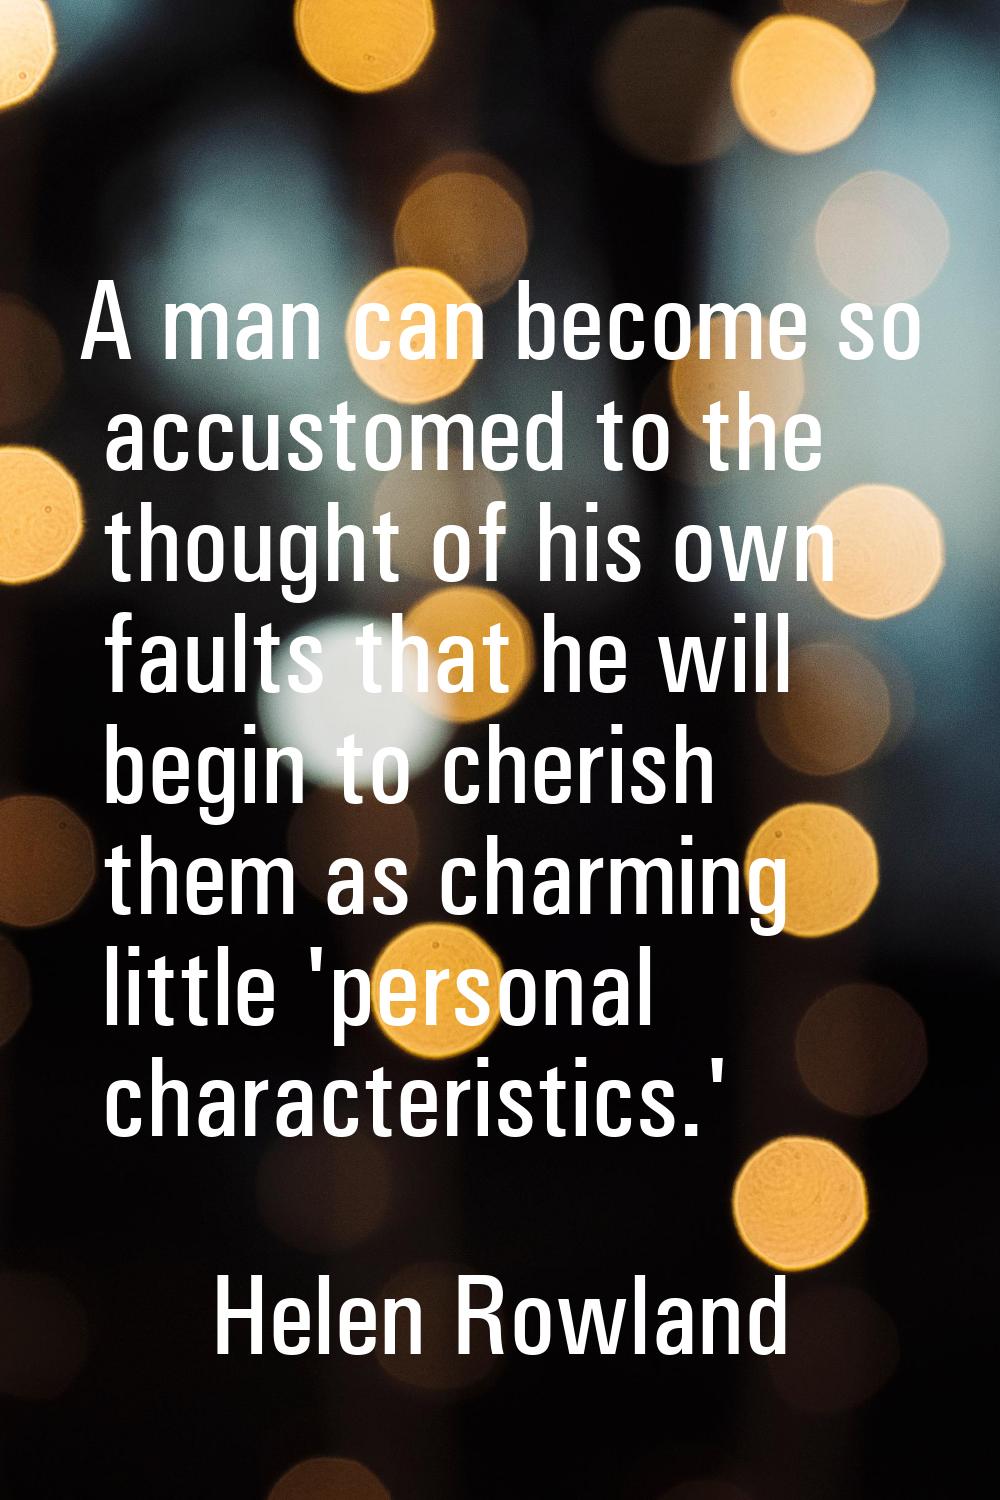 A man can become so accustomed to the thought of his own faults that he will begin to cherish them 